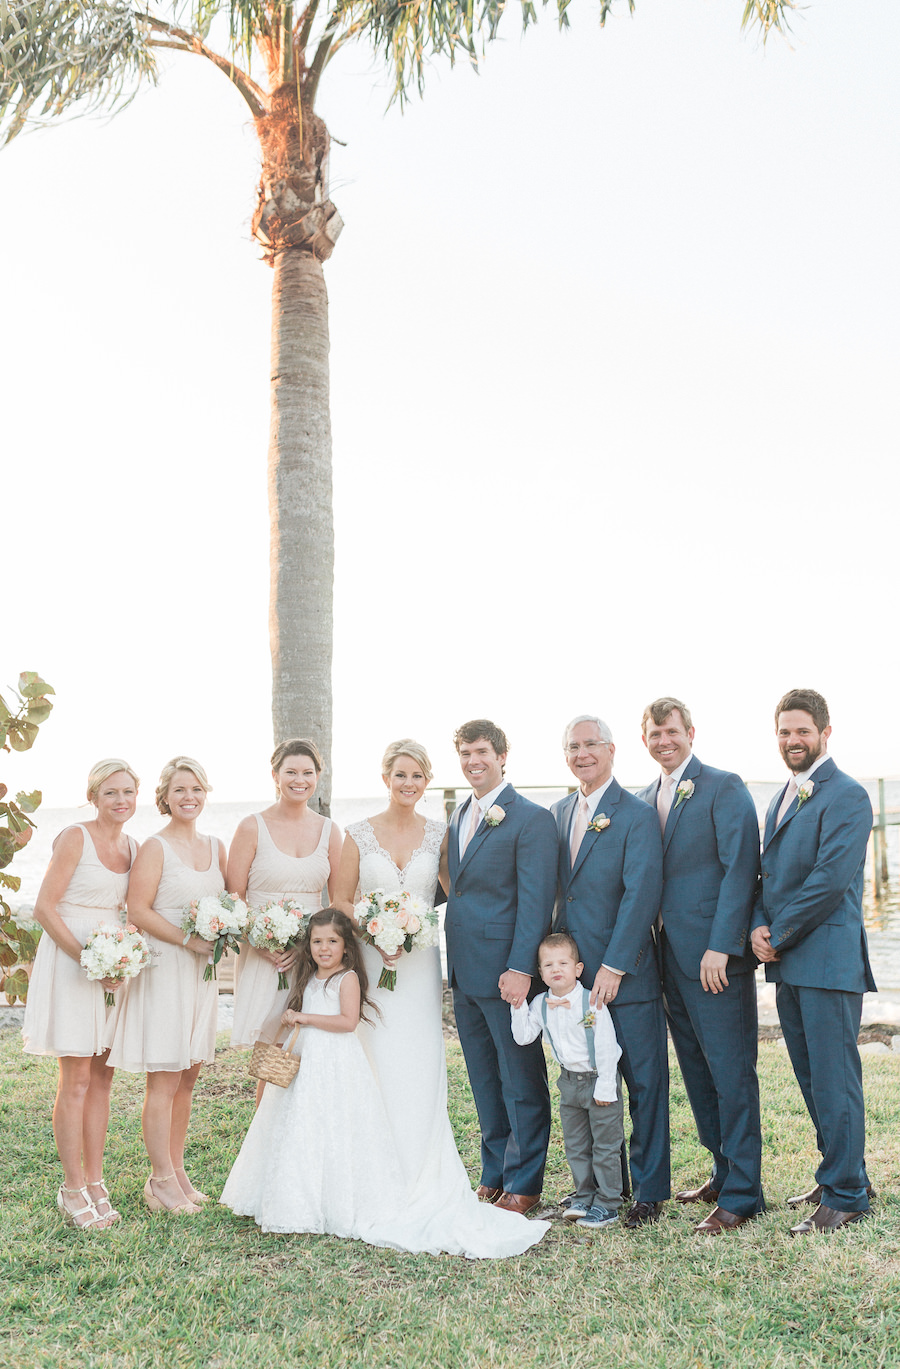 Outdoor, Bridal Party Wedding Portrait with Bridesmaids and Groomsmen | Bridesmaids in Neutral Tea Length Wedding Dresses and Groomsmen in Navy Blue Suits